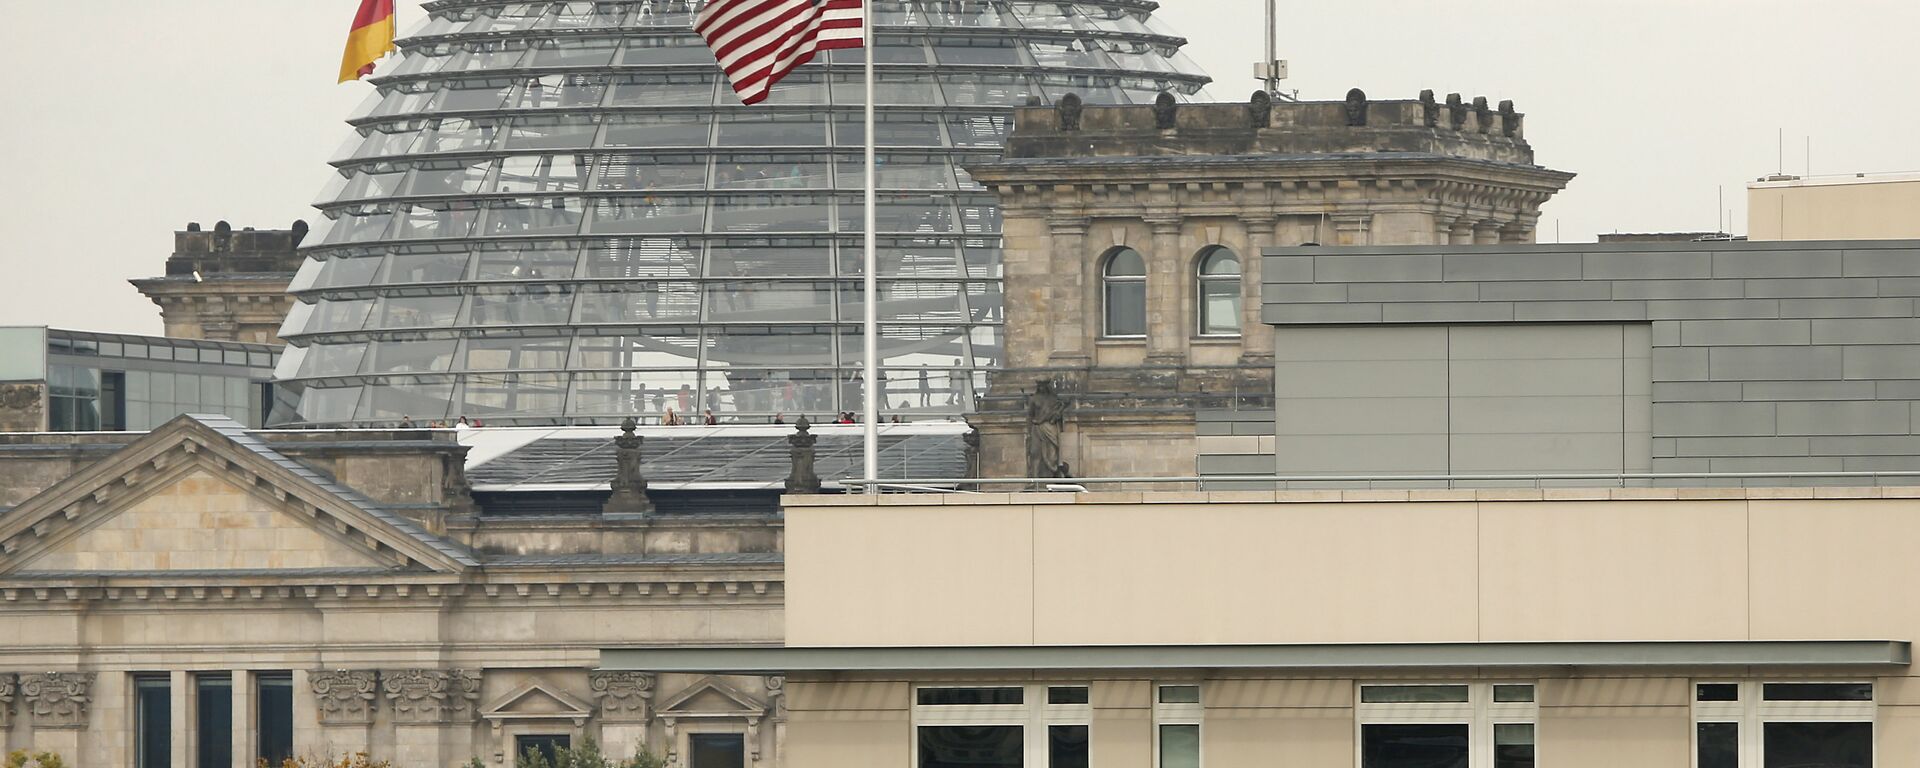 American flag flies on top of the U.S. embassy in front of the Reichstag building that houses the German Parliament, Bundestag, in Berlin, Germany (File) - Sputnik International, 1920, 10.08.2023